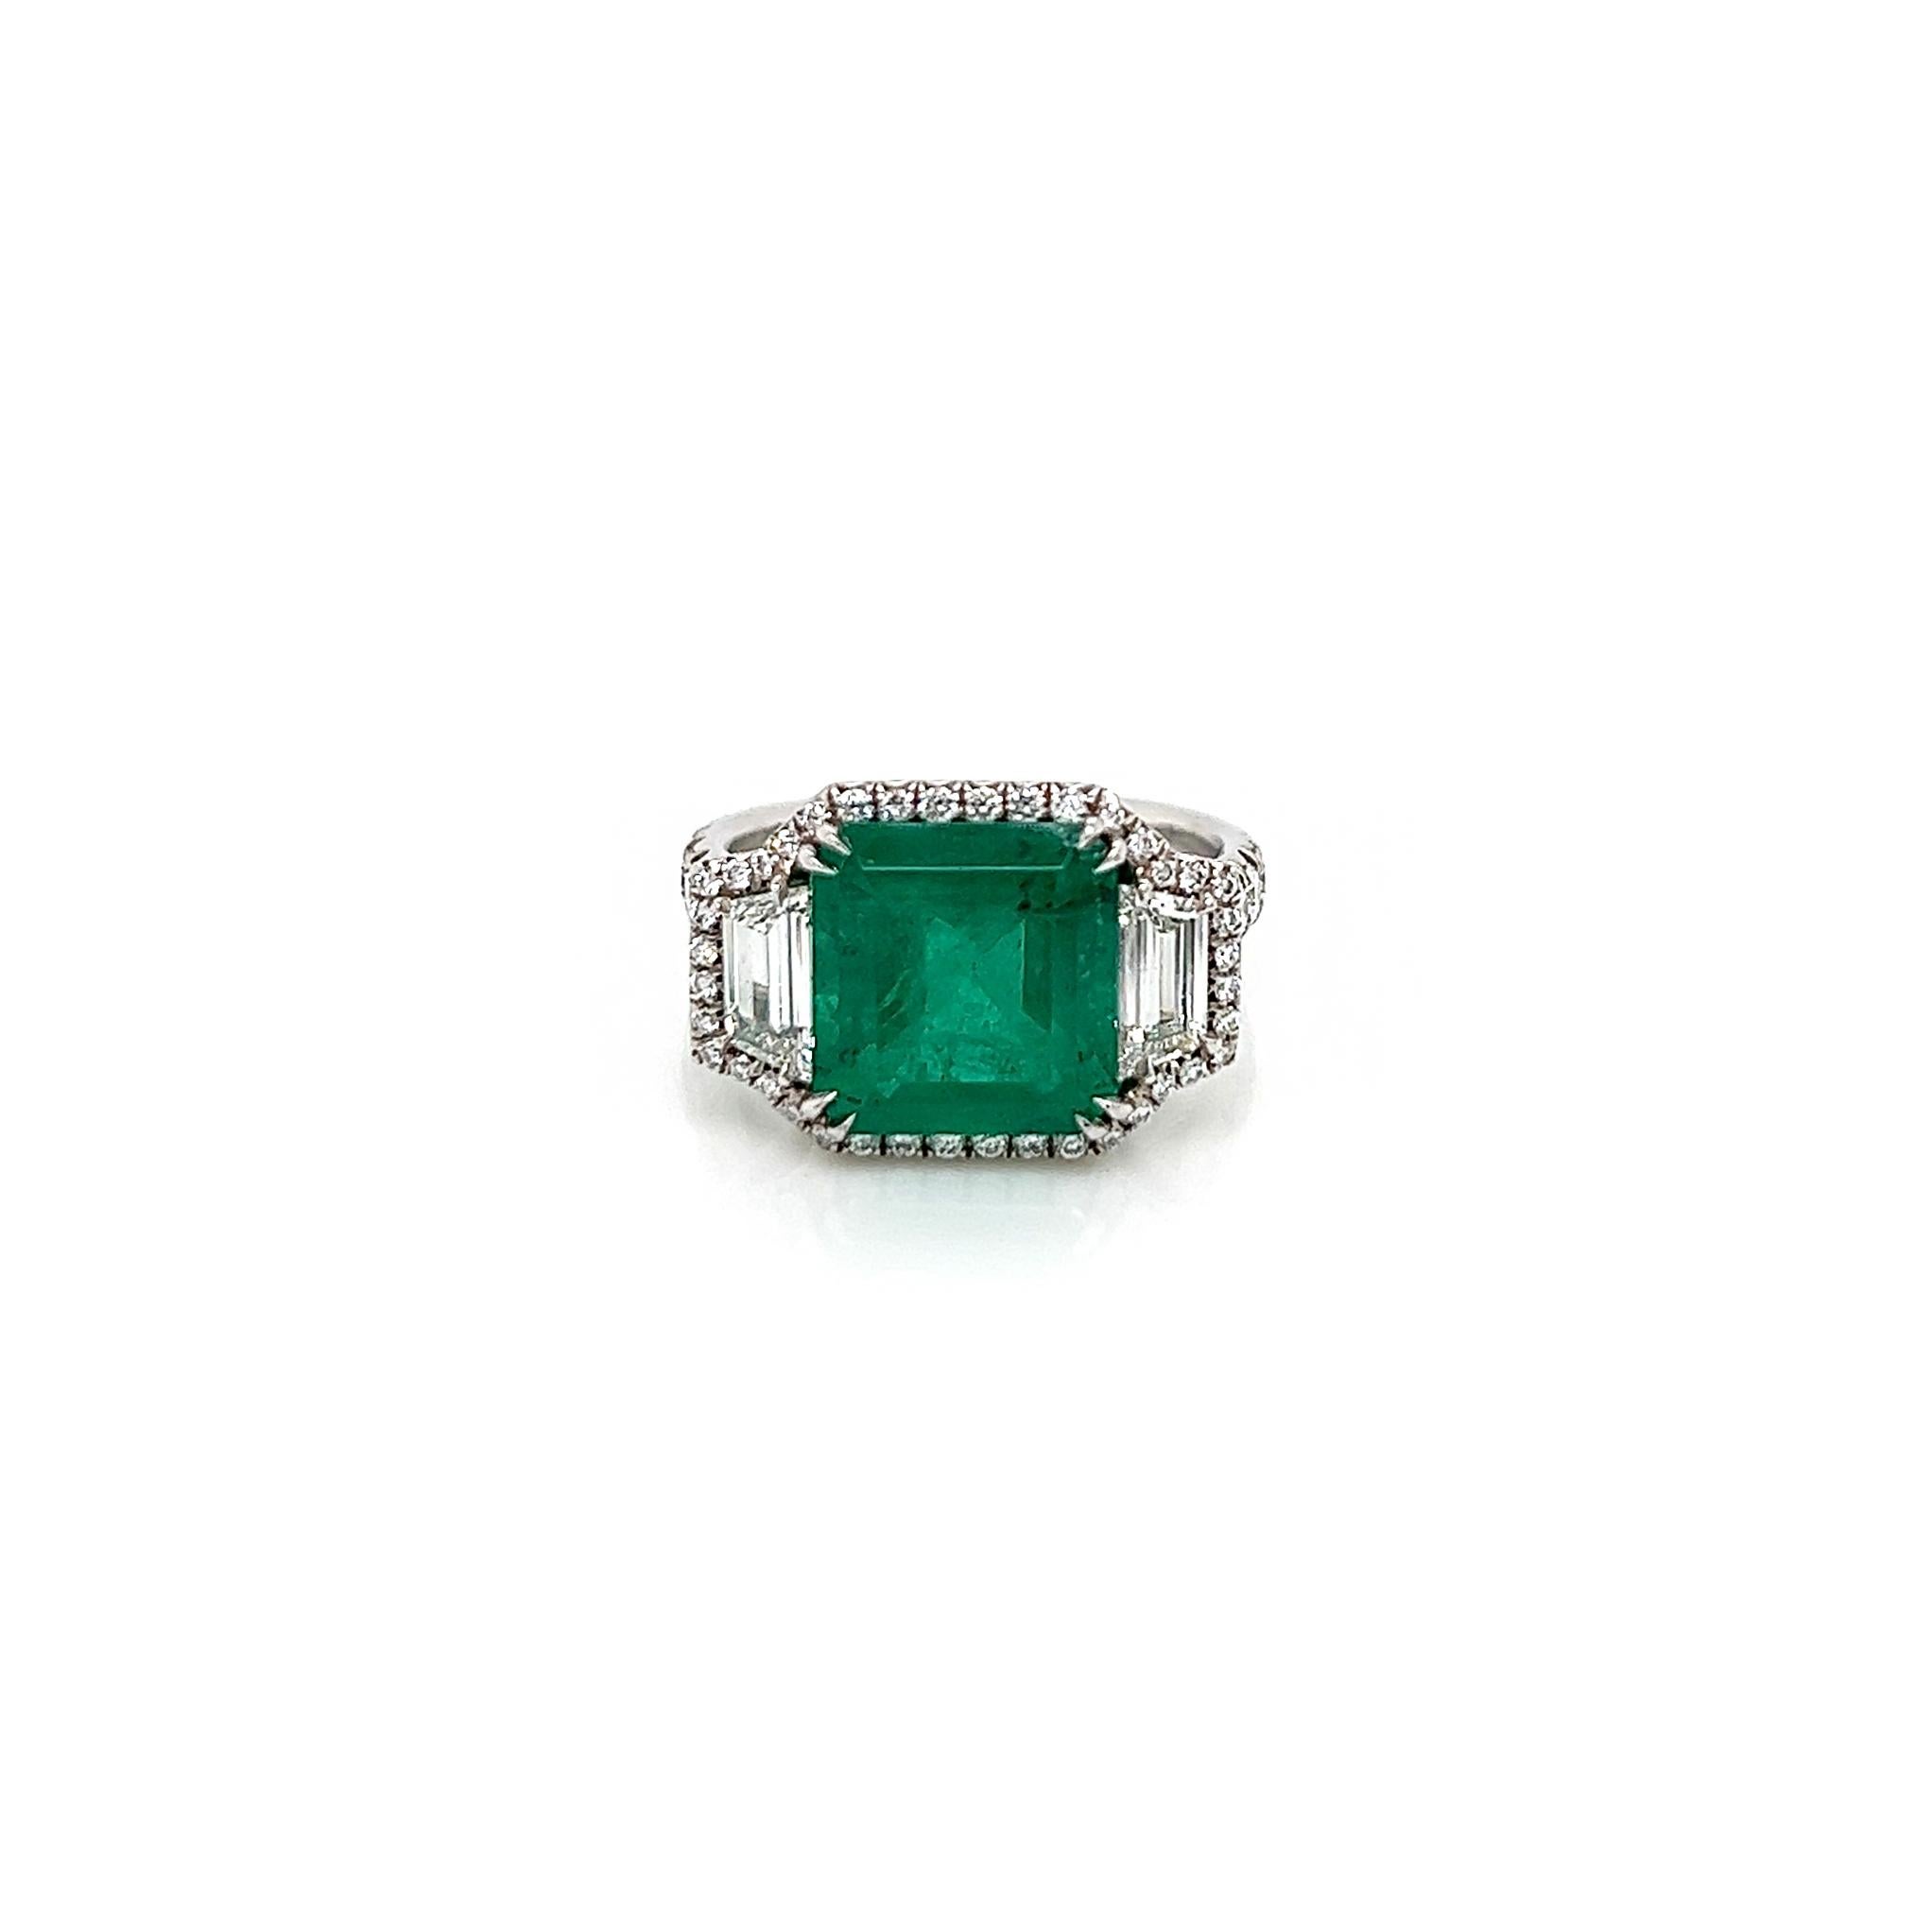 4.46 Total Carat Emerald and Diamond Halo Ladies Ring. GIA Certified.

-Metal Type: Platinum
-3.91 Carat Cut Natural Colombian Beryl Emerald, GIA Certified 
-Emerald Color: Green
-0.55 Carat Round and Trapezoid Natural side Diamonds. 
      ~Round